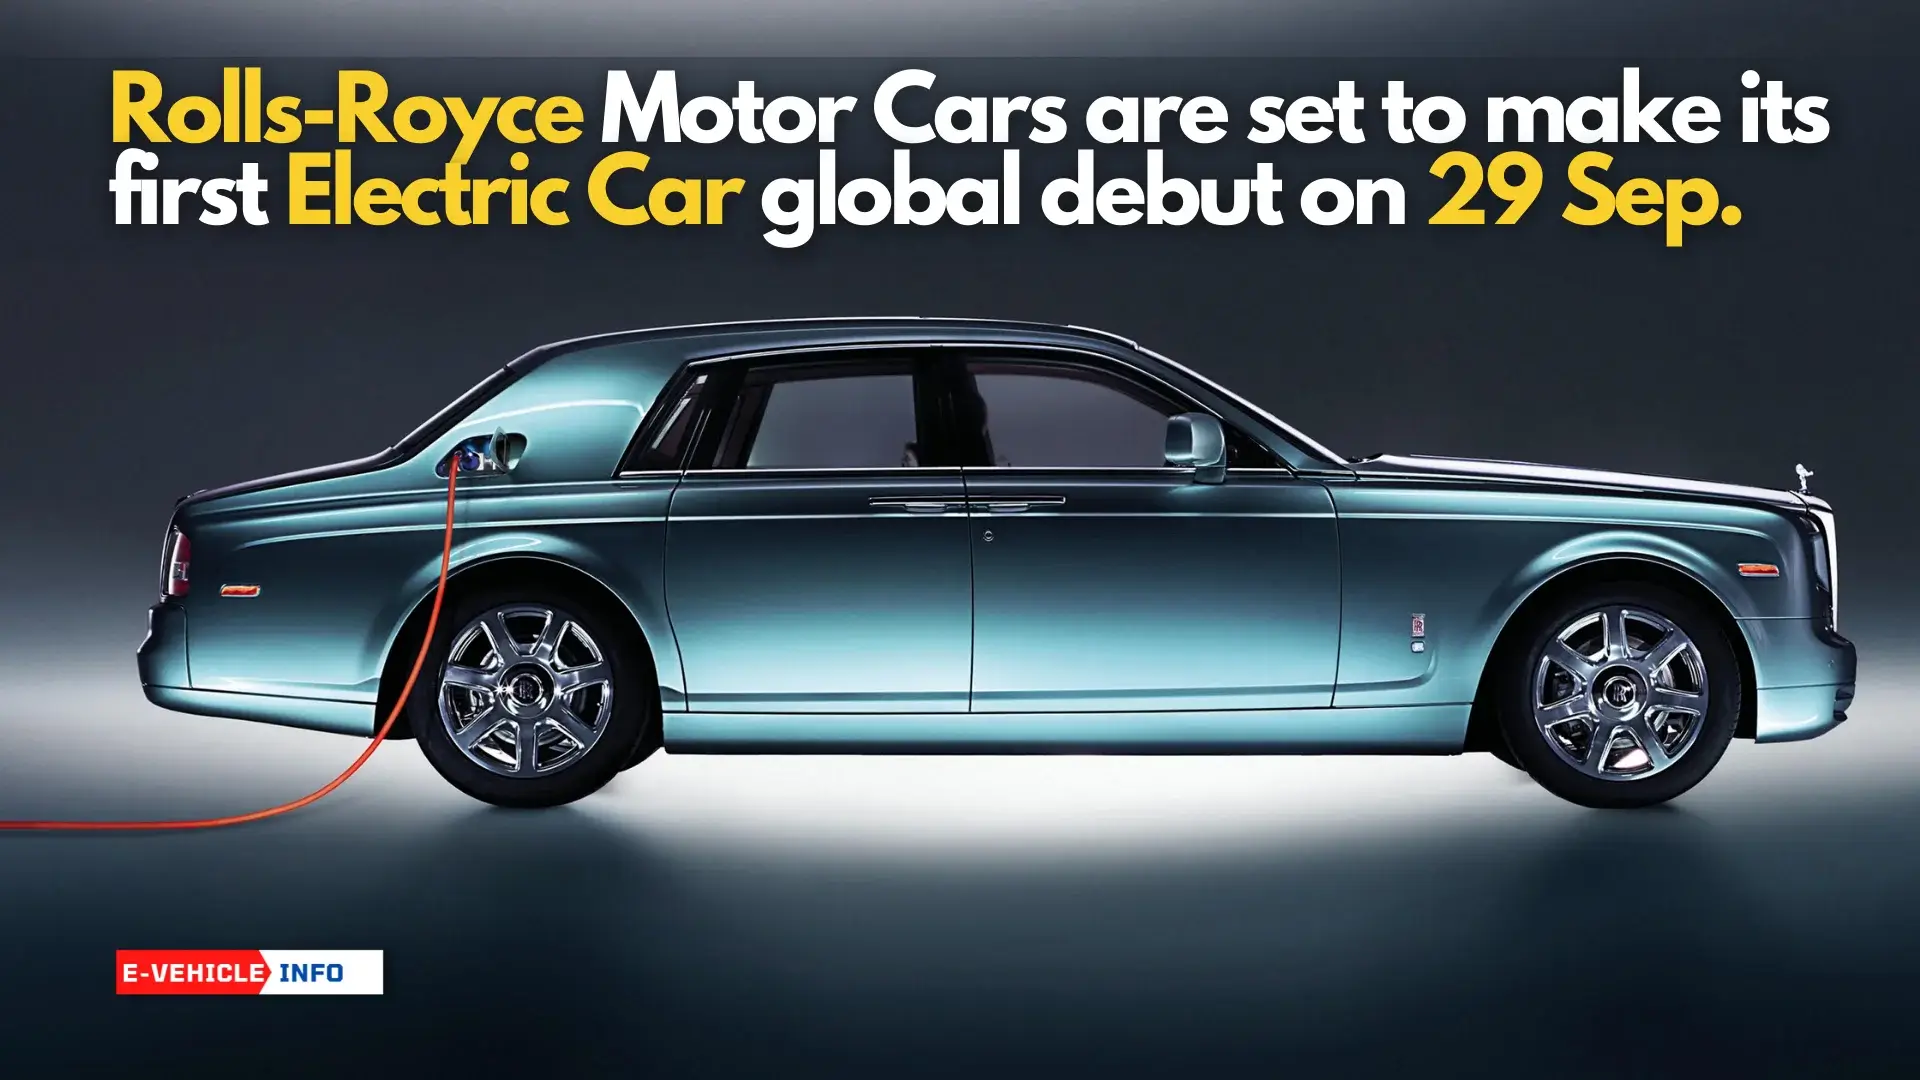 https://e-vehicleinfo.com/rolls-royc-set-to-make-its-first-electric-car-global-debut/